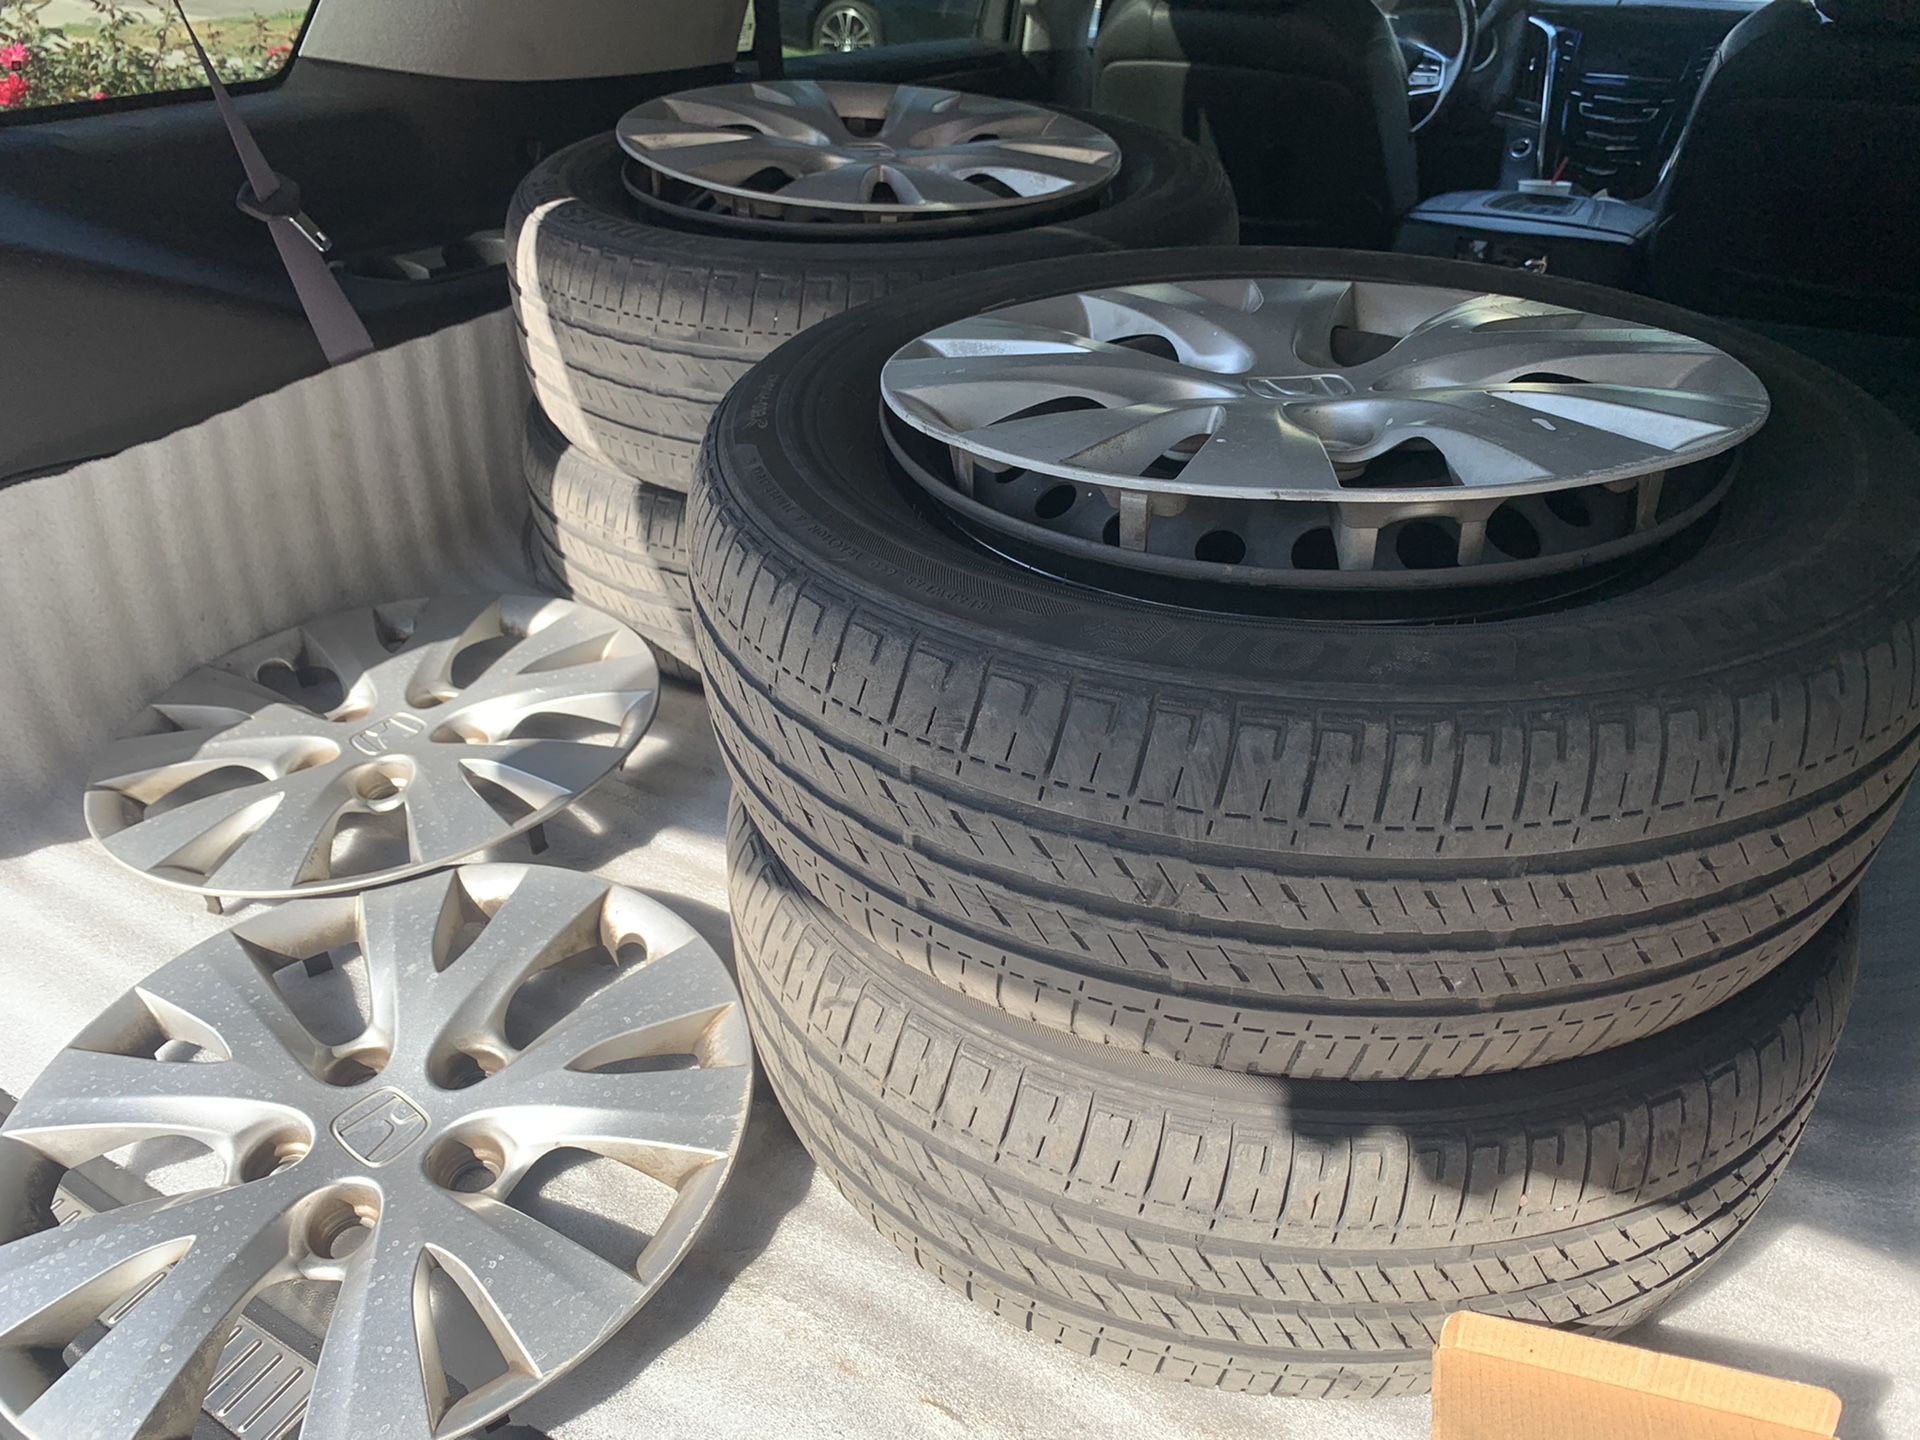 Honda Civic rims and tires (steel wheels with hubcaps ) 15”